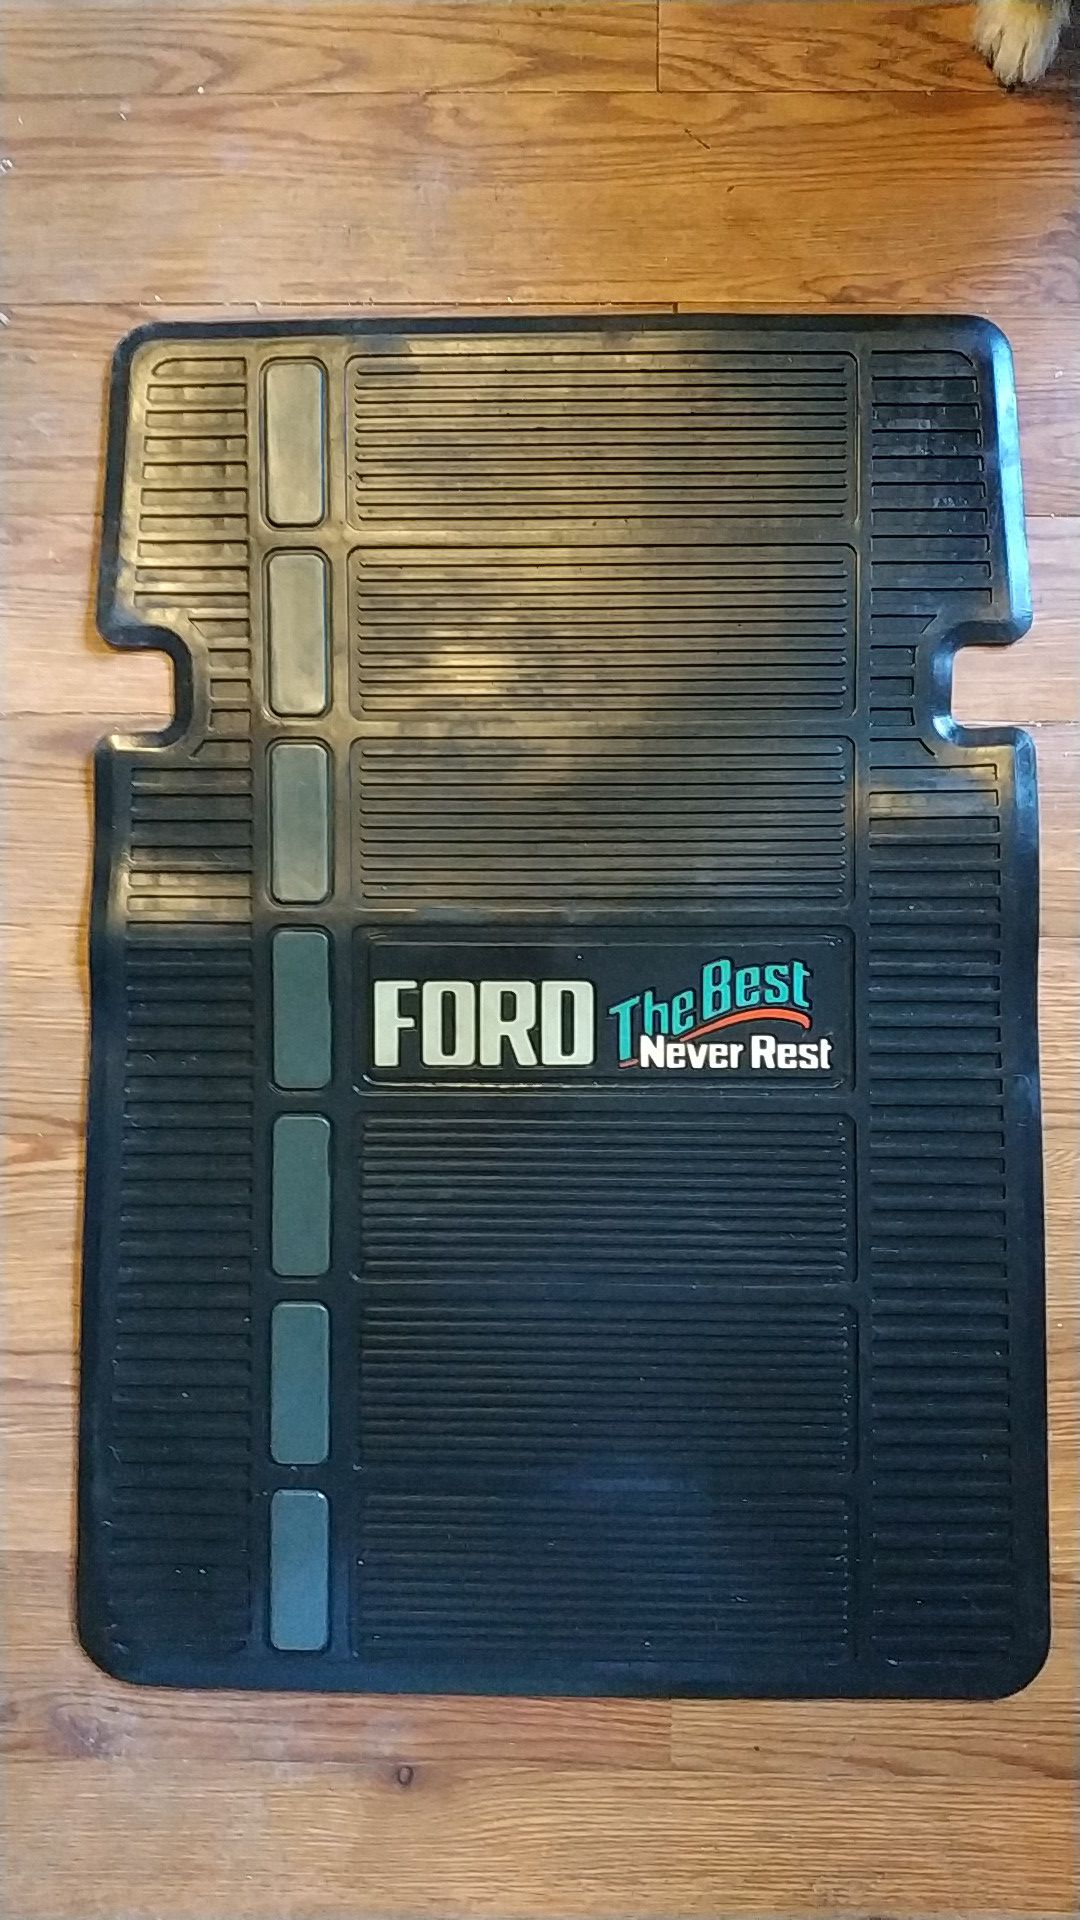 AUTHENTIC VINTAGE FORD "The Best Never Rests" 4-color Rubber Floor Mats (Easy Contact Free Pickup)